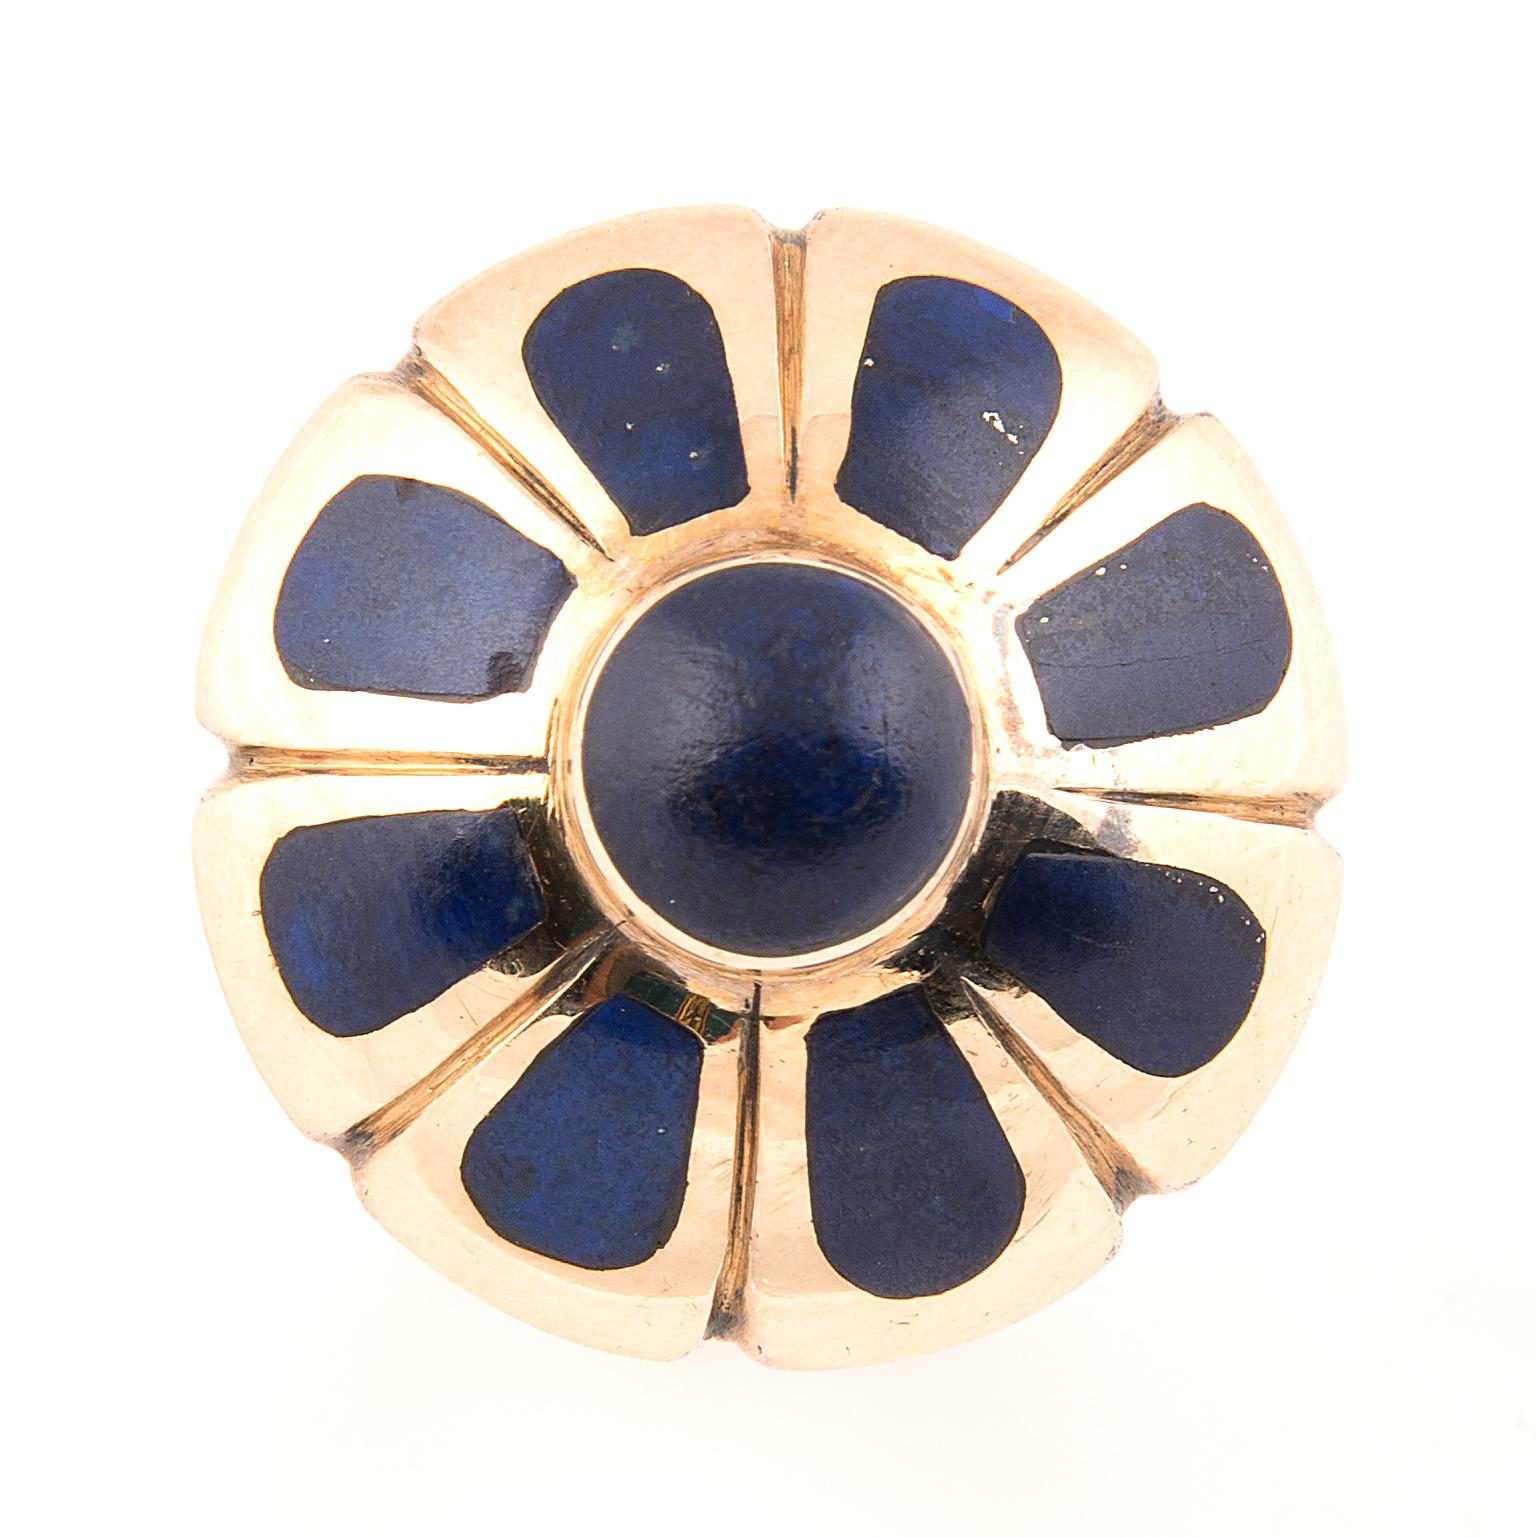 Italian ring designed as a flower, the 18kt yellow gold petals set with Lapis Lazuli, centered by a cabochon Lapis Lazuli 
Ring size EU 59, US 8 3/4
Marked 18k
Italy, 1970s